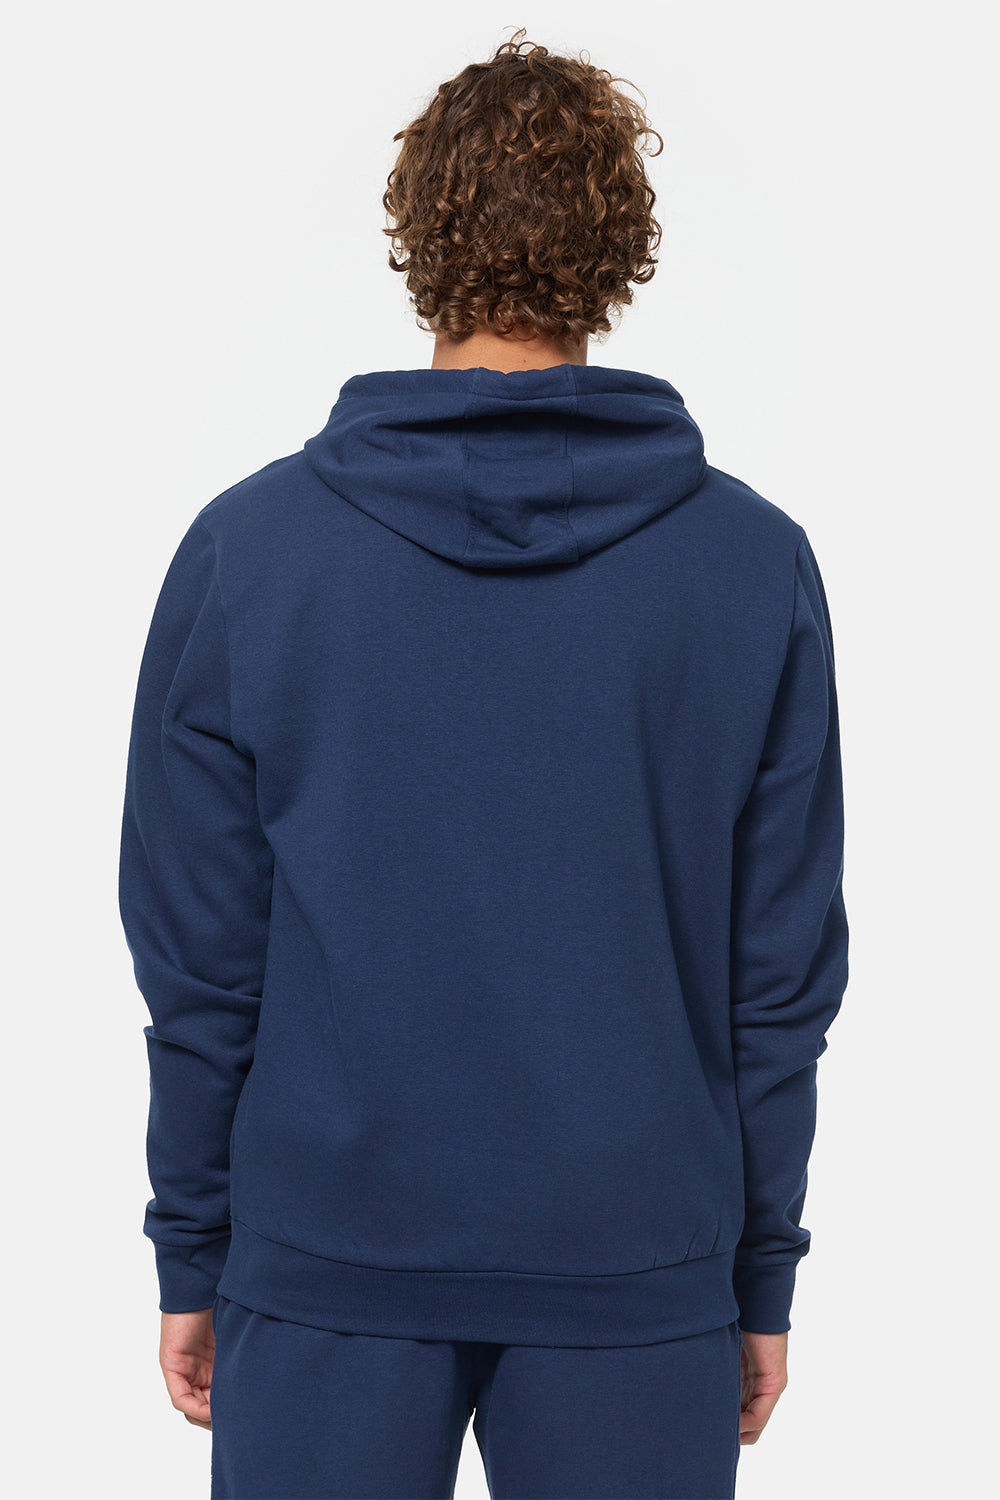 Lonsdale Stotfield Hoodie Navy Red White